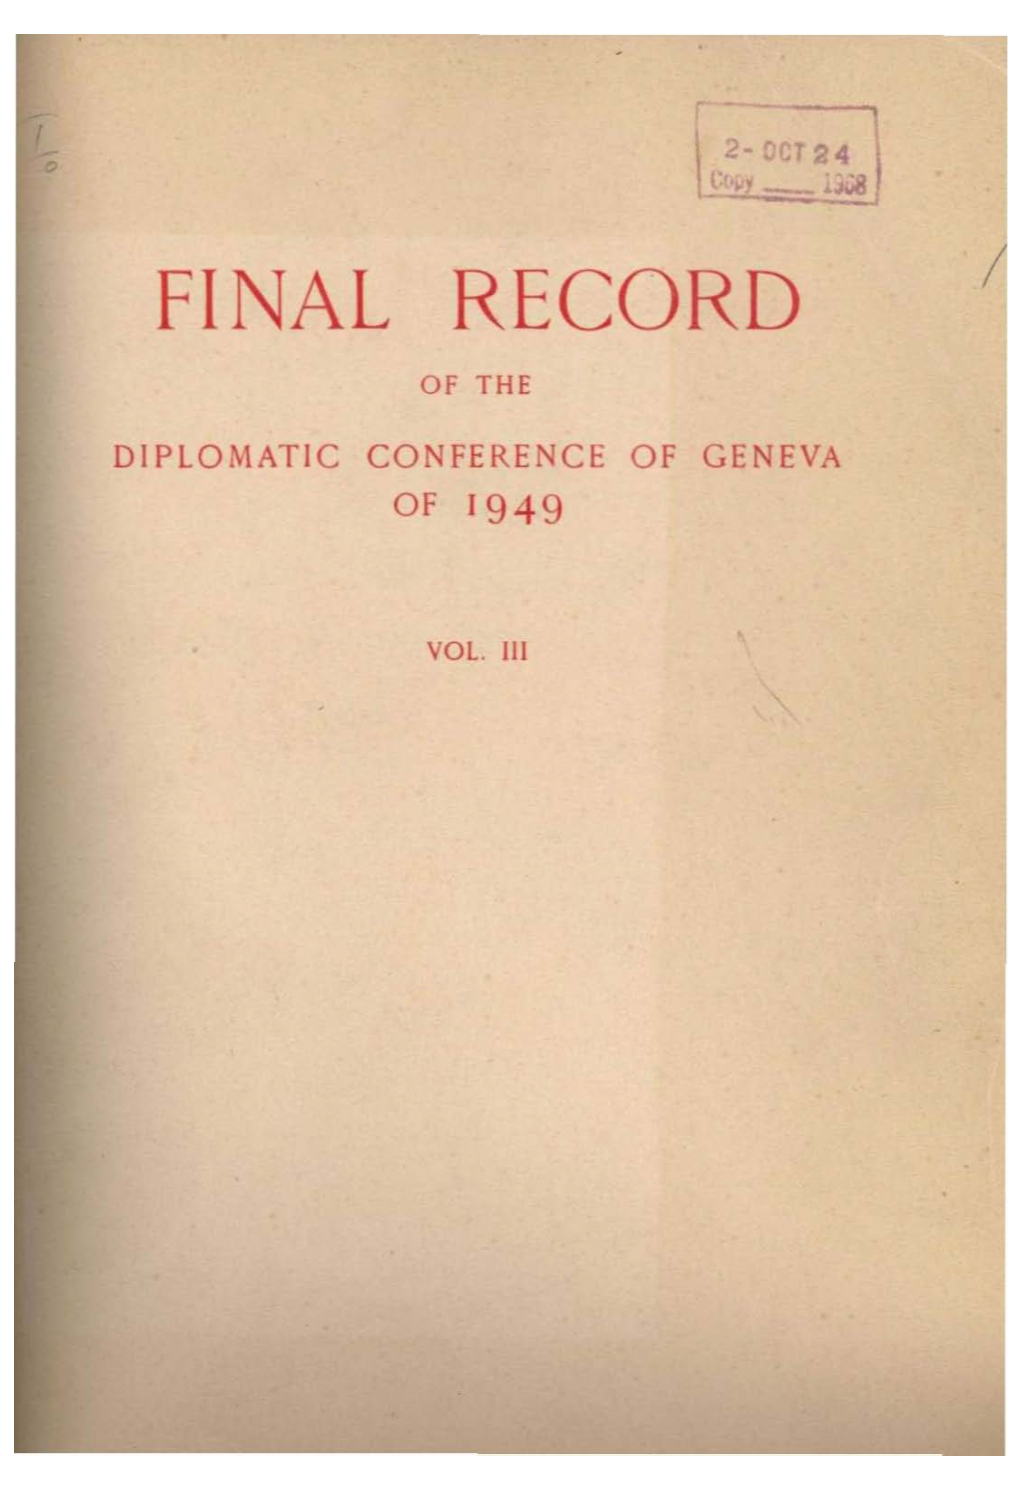 Final Record of the Diplomatic Conference of Geneva of 1949, Volume 3